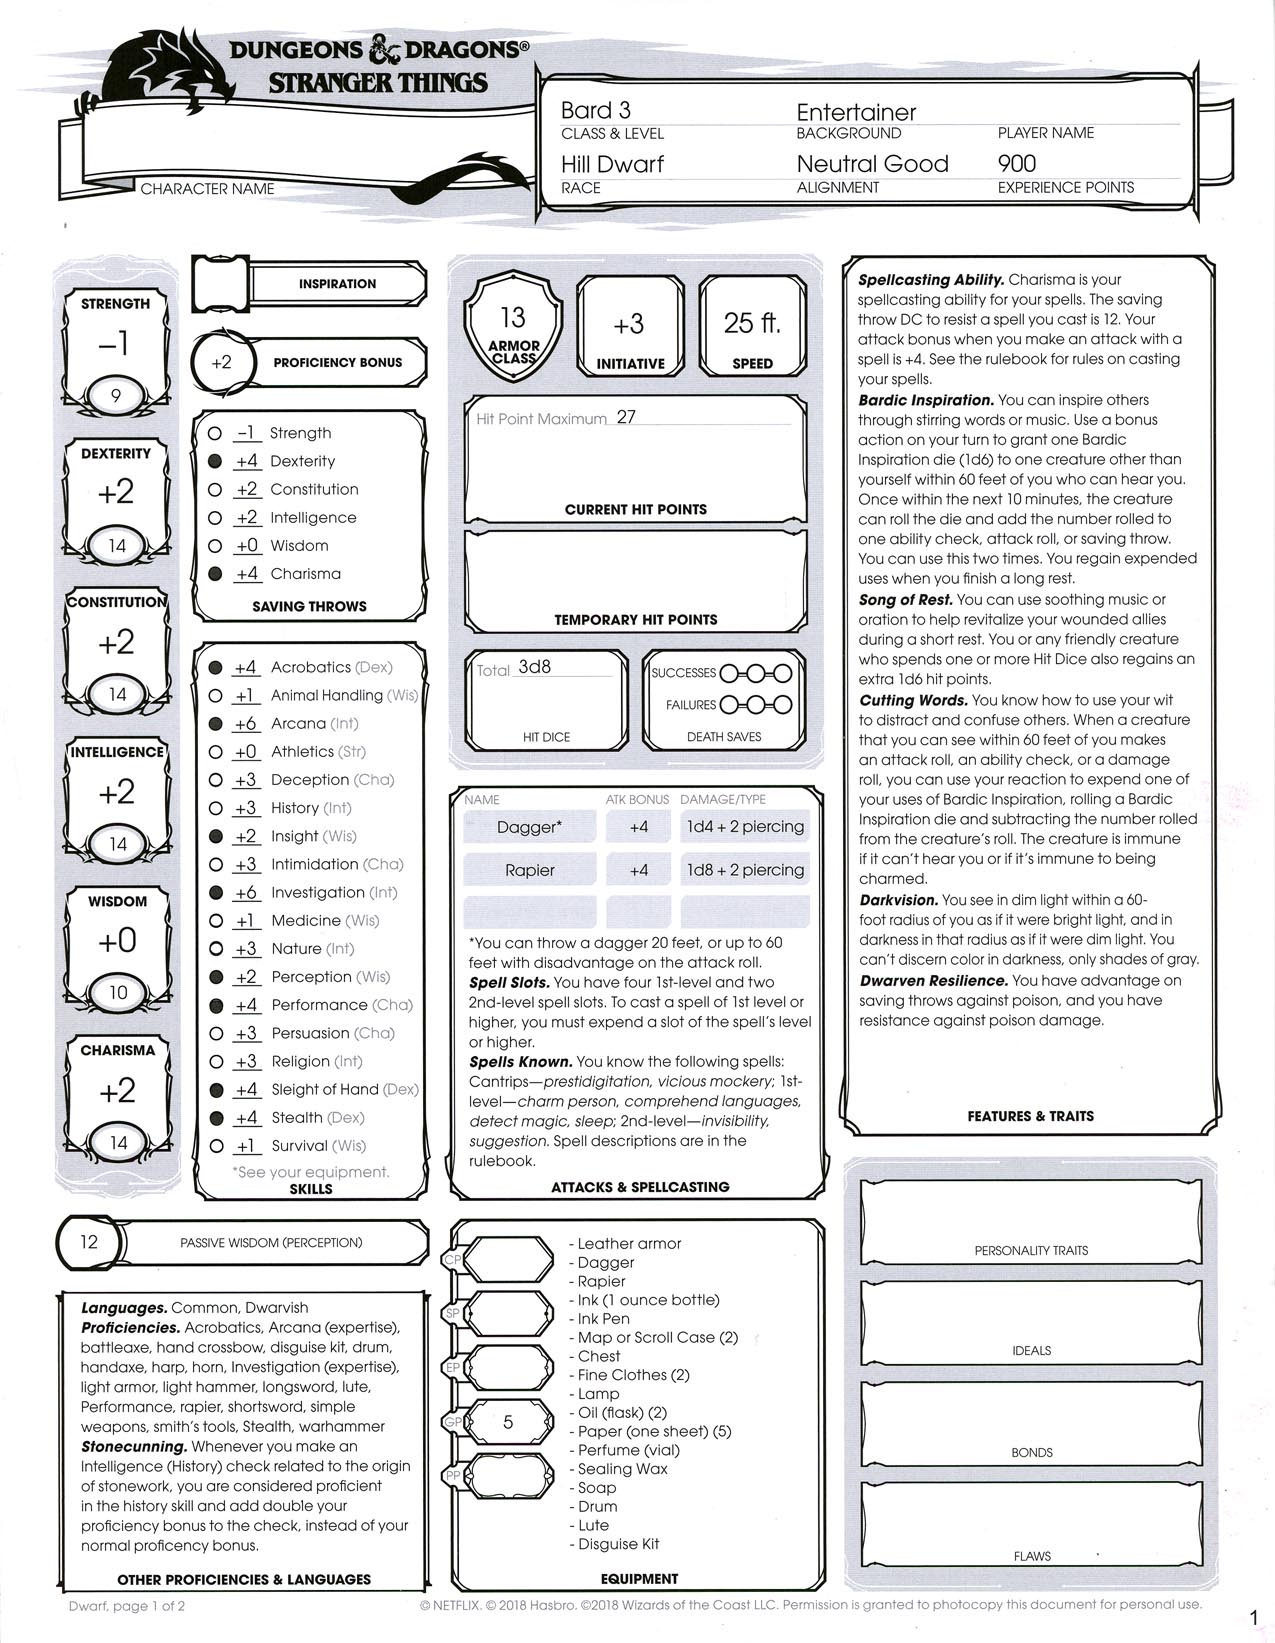 5th Edition OGL by Roll20 - Roll20 Wiki.